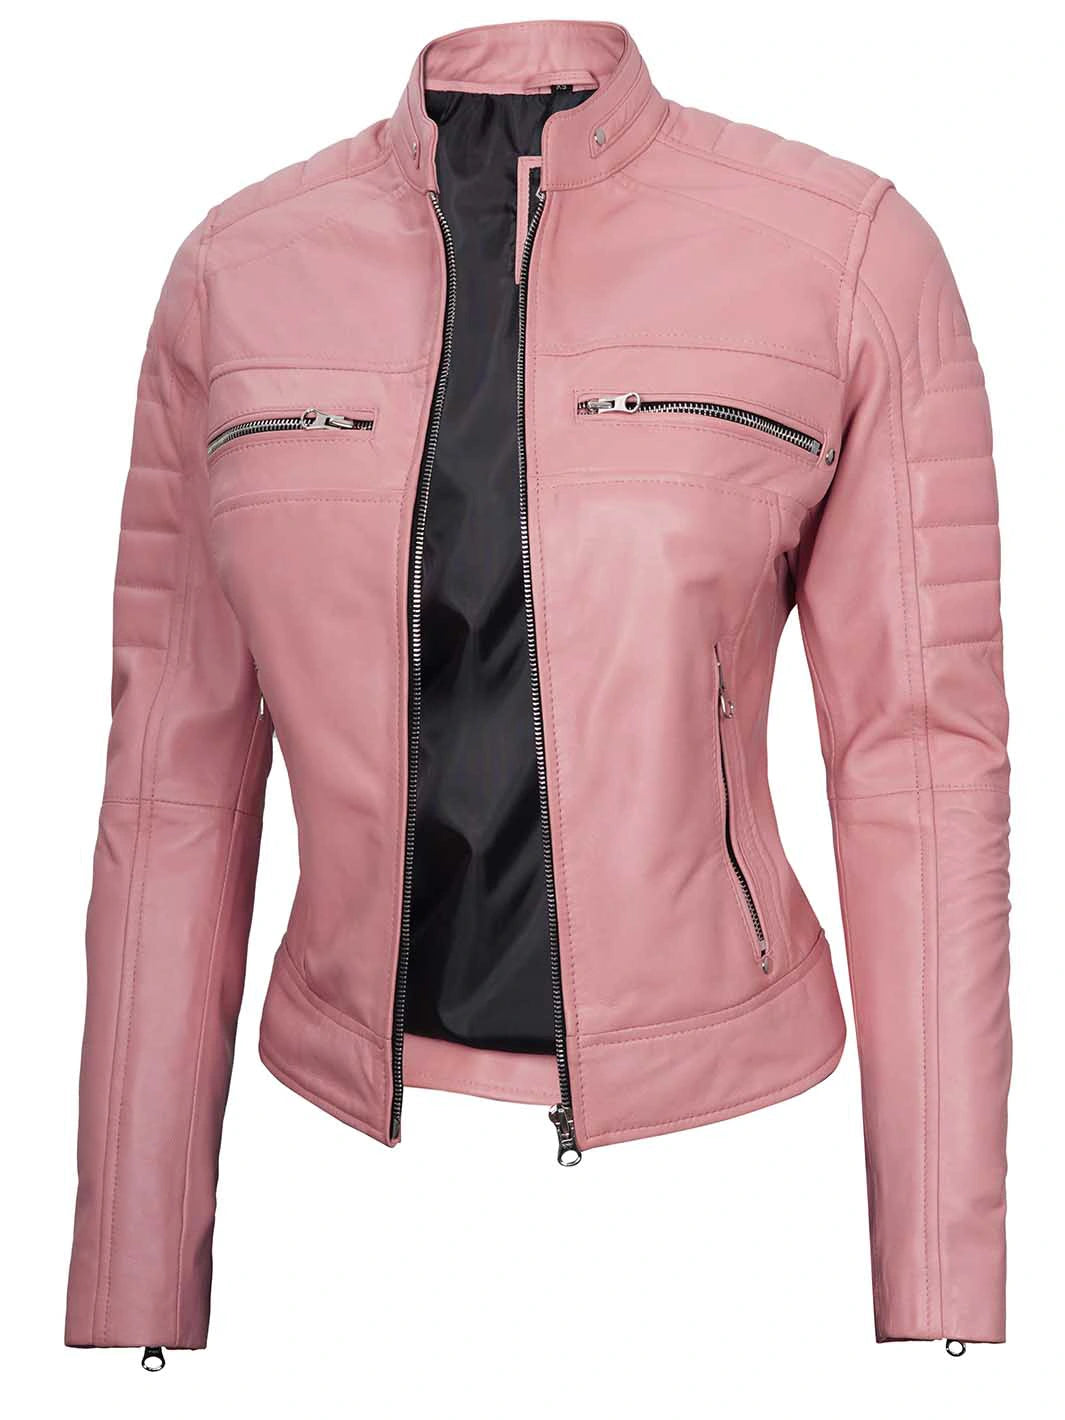 Womens cafe racer leather jacket